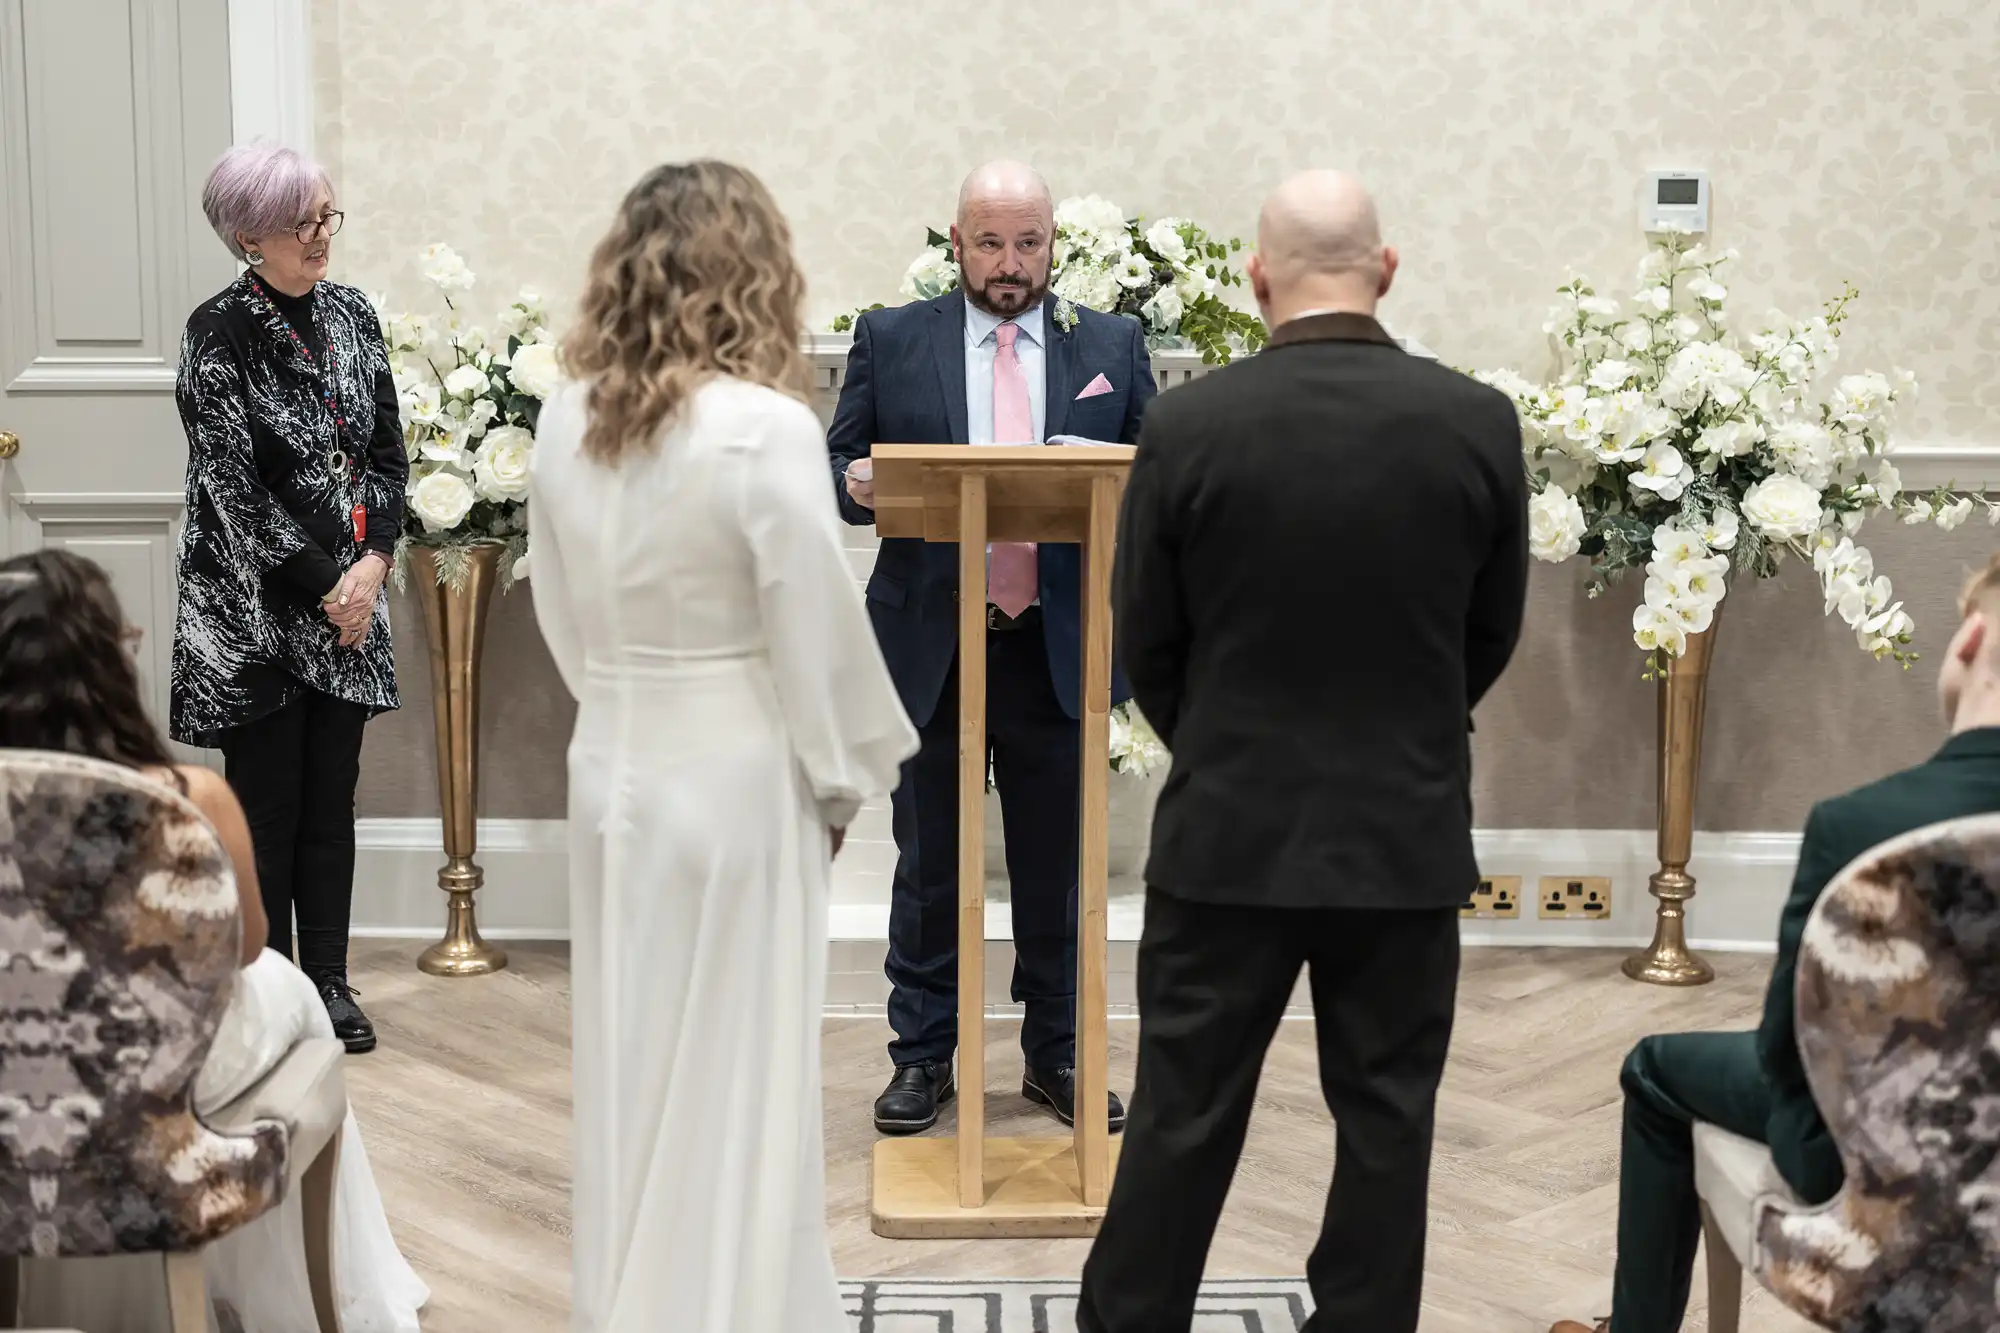 A wedding ceremony in progress with a couple standing facing a person reading from a podium. Two floral arrangements are visible in the background.